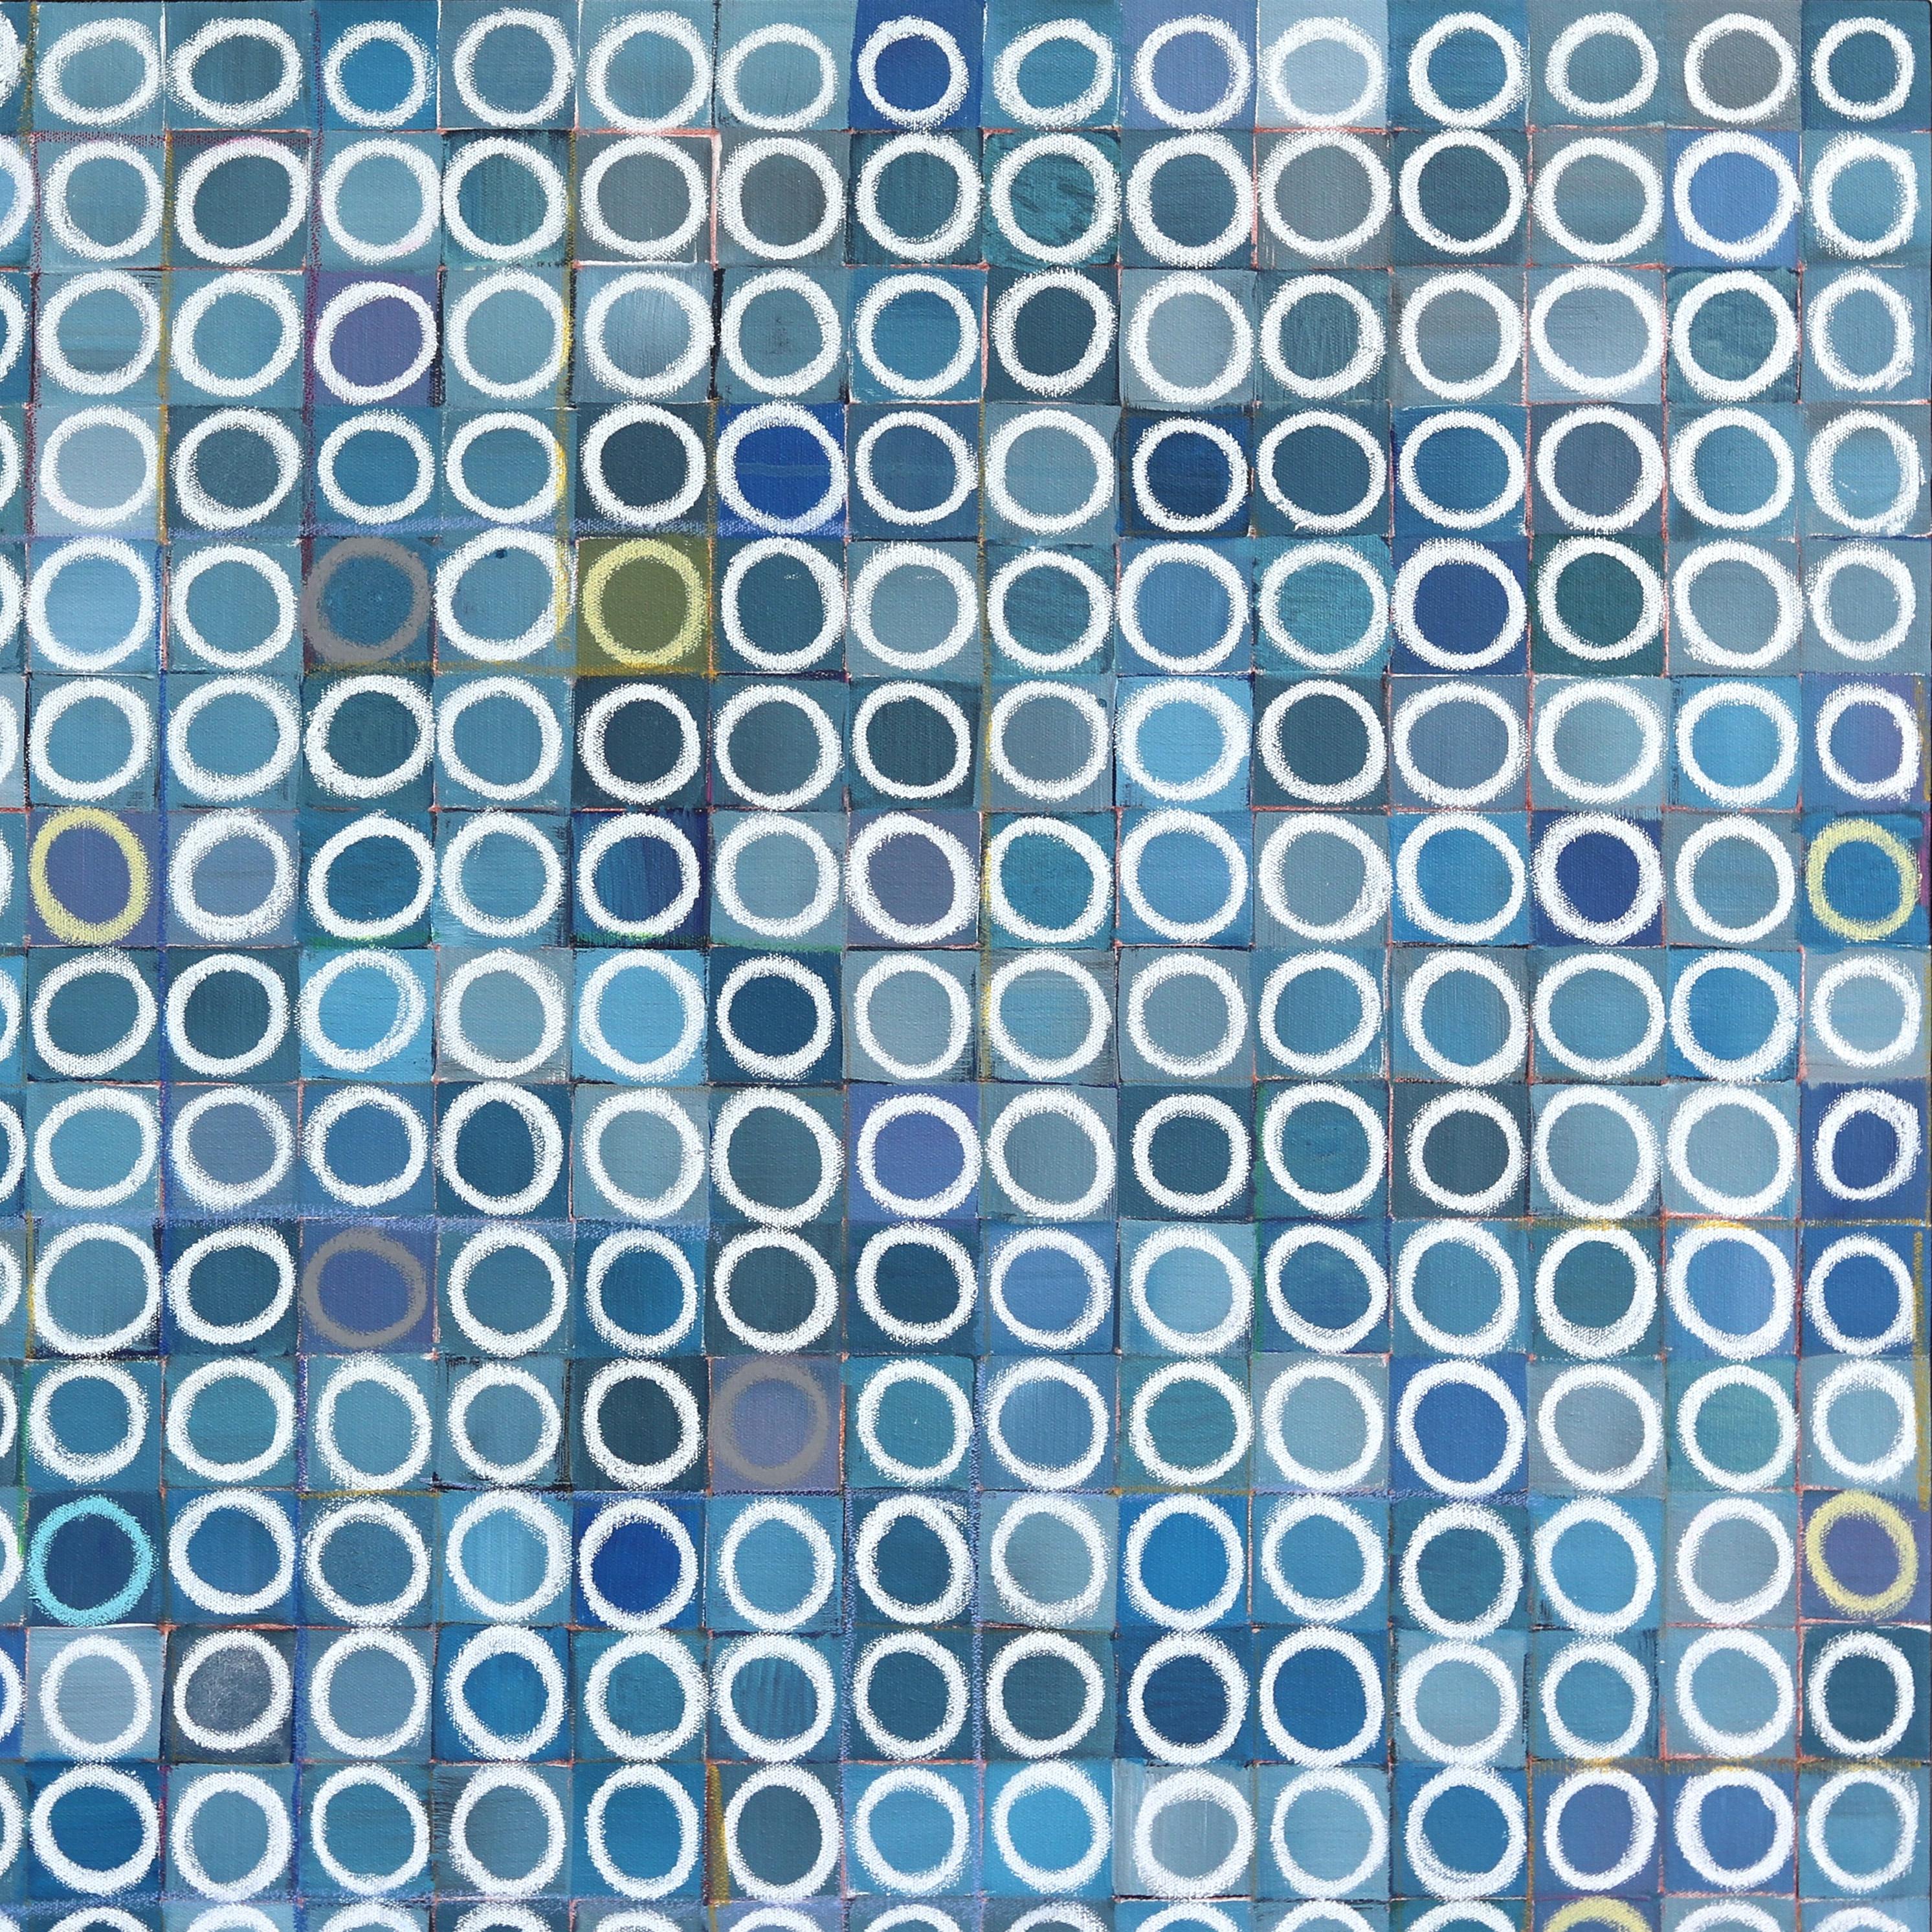 1089 Circles - Large Blue Abstract Geometric Original Painting For Sale 3